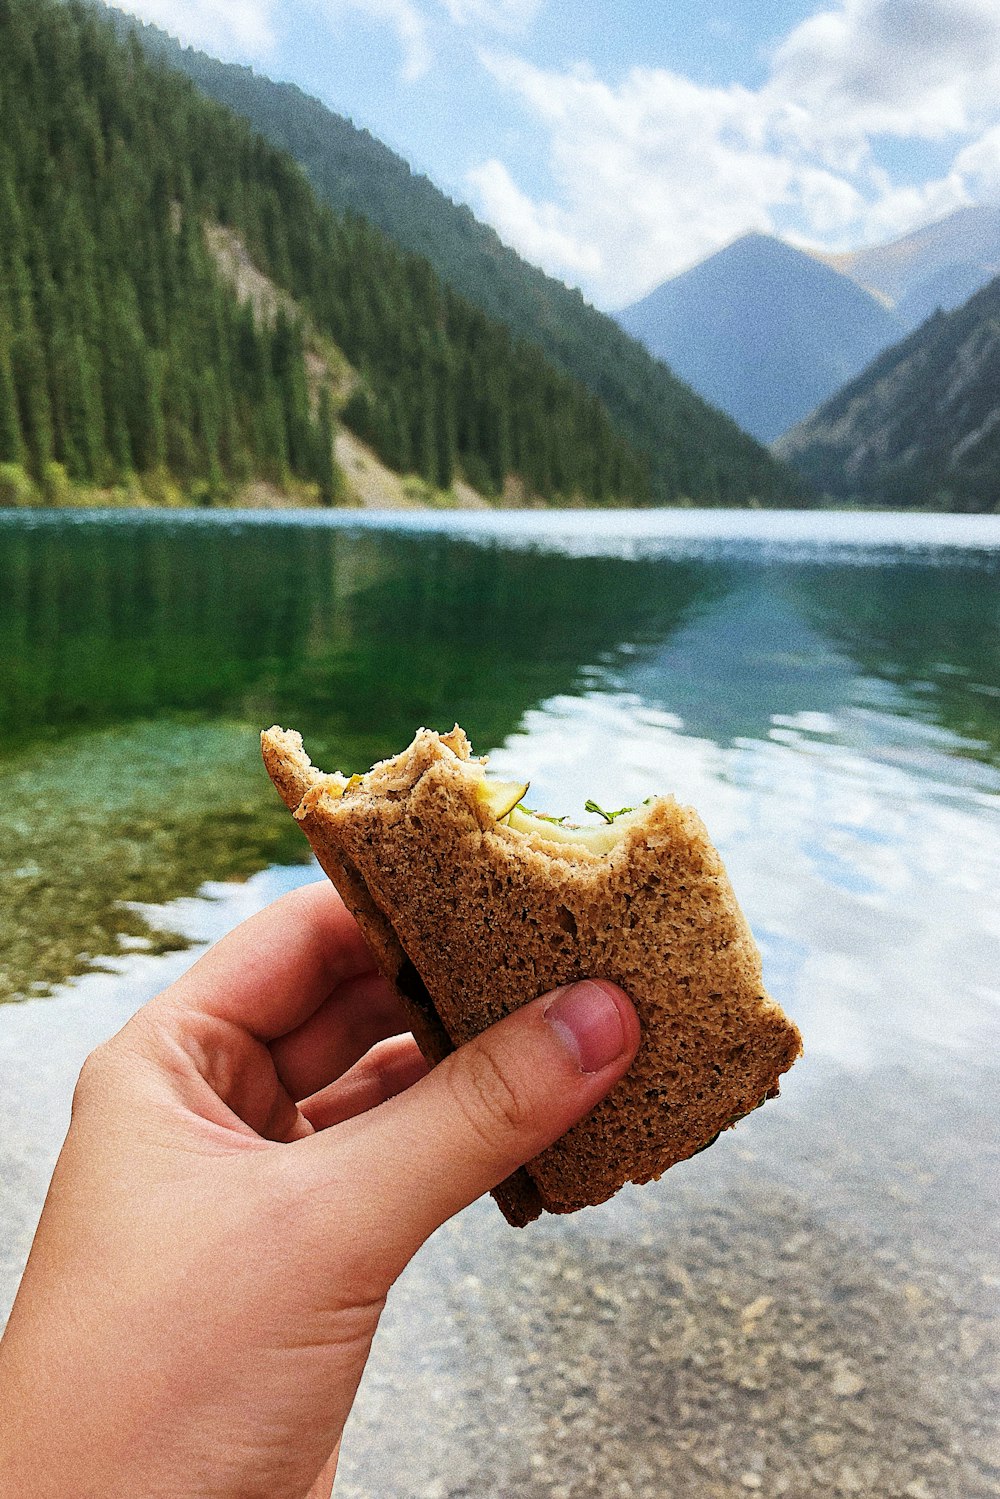 a hand holding a piece of bread over a lake